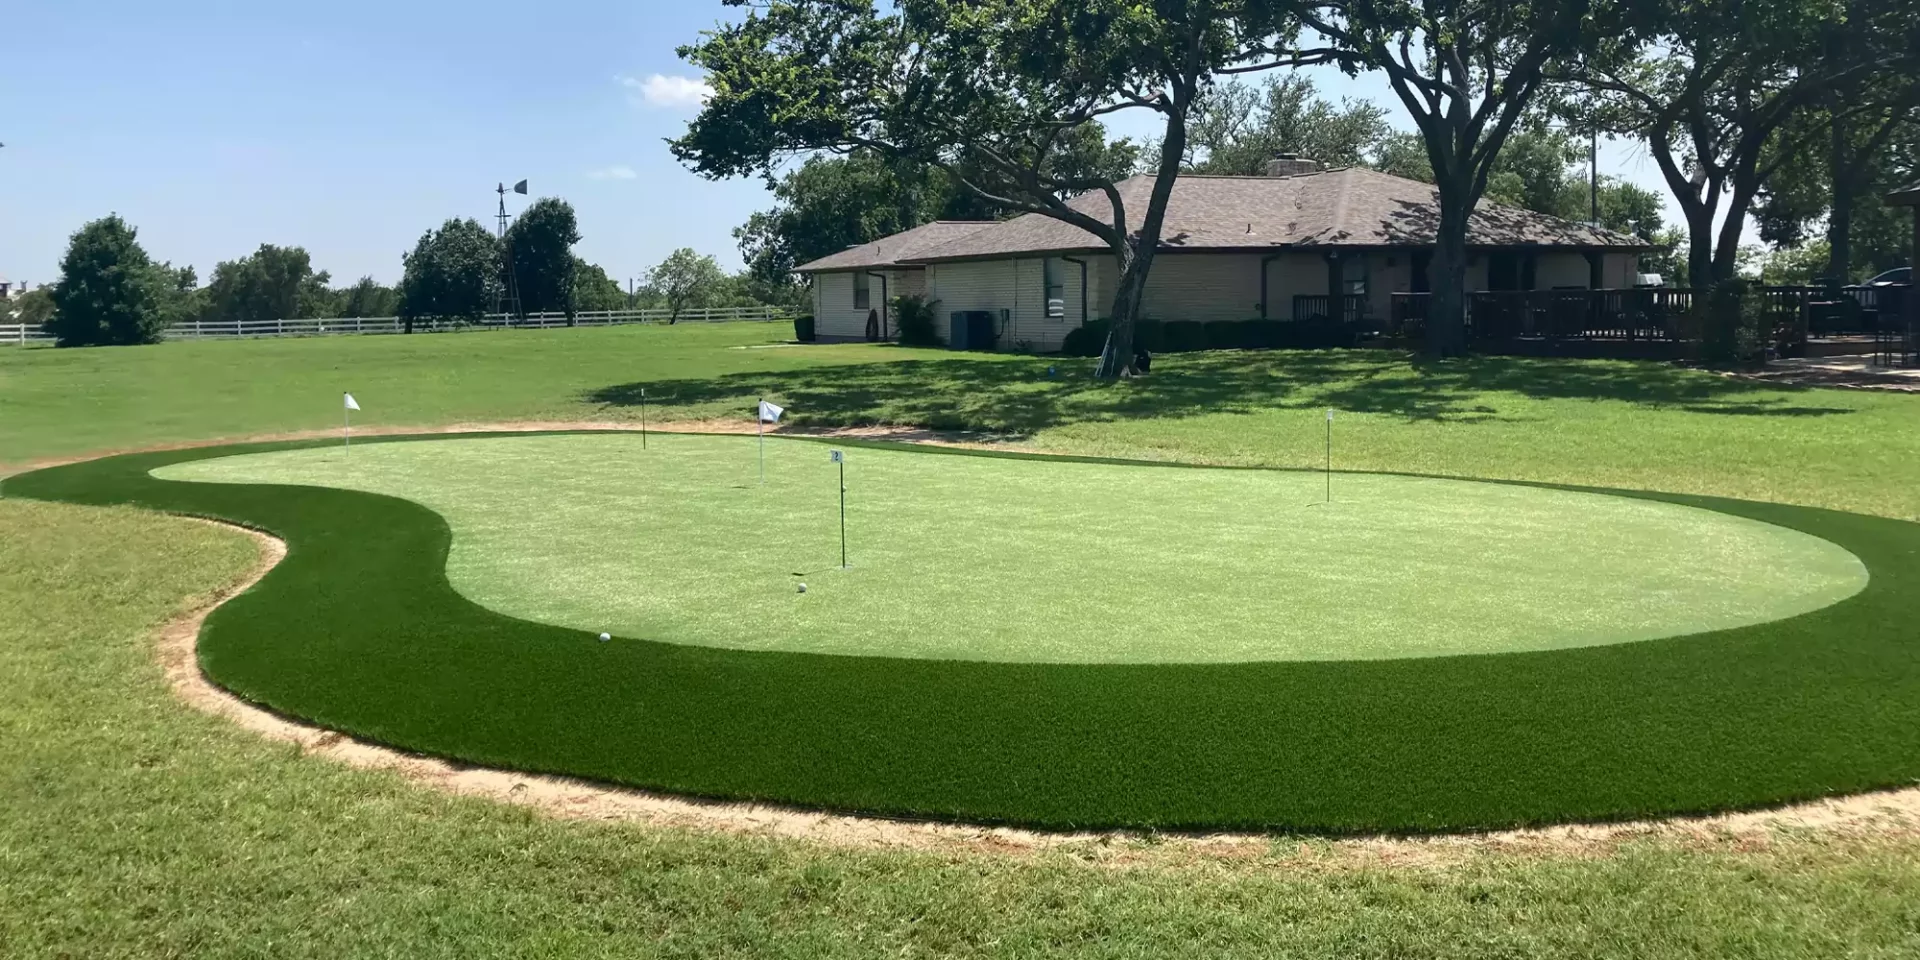 Commercial putting green from Premiere Greens